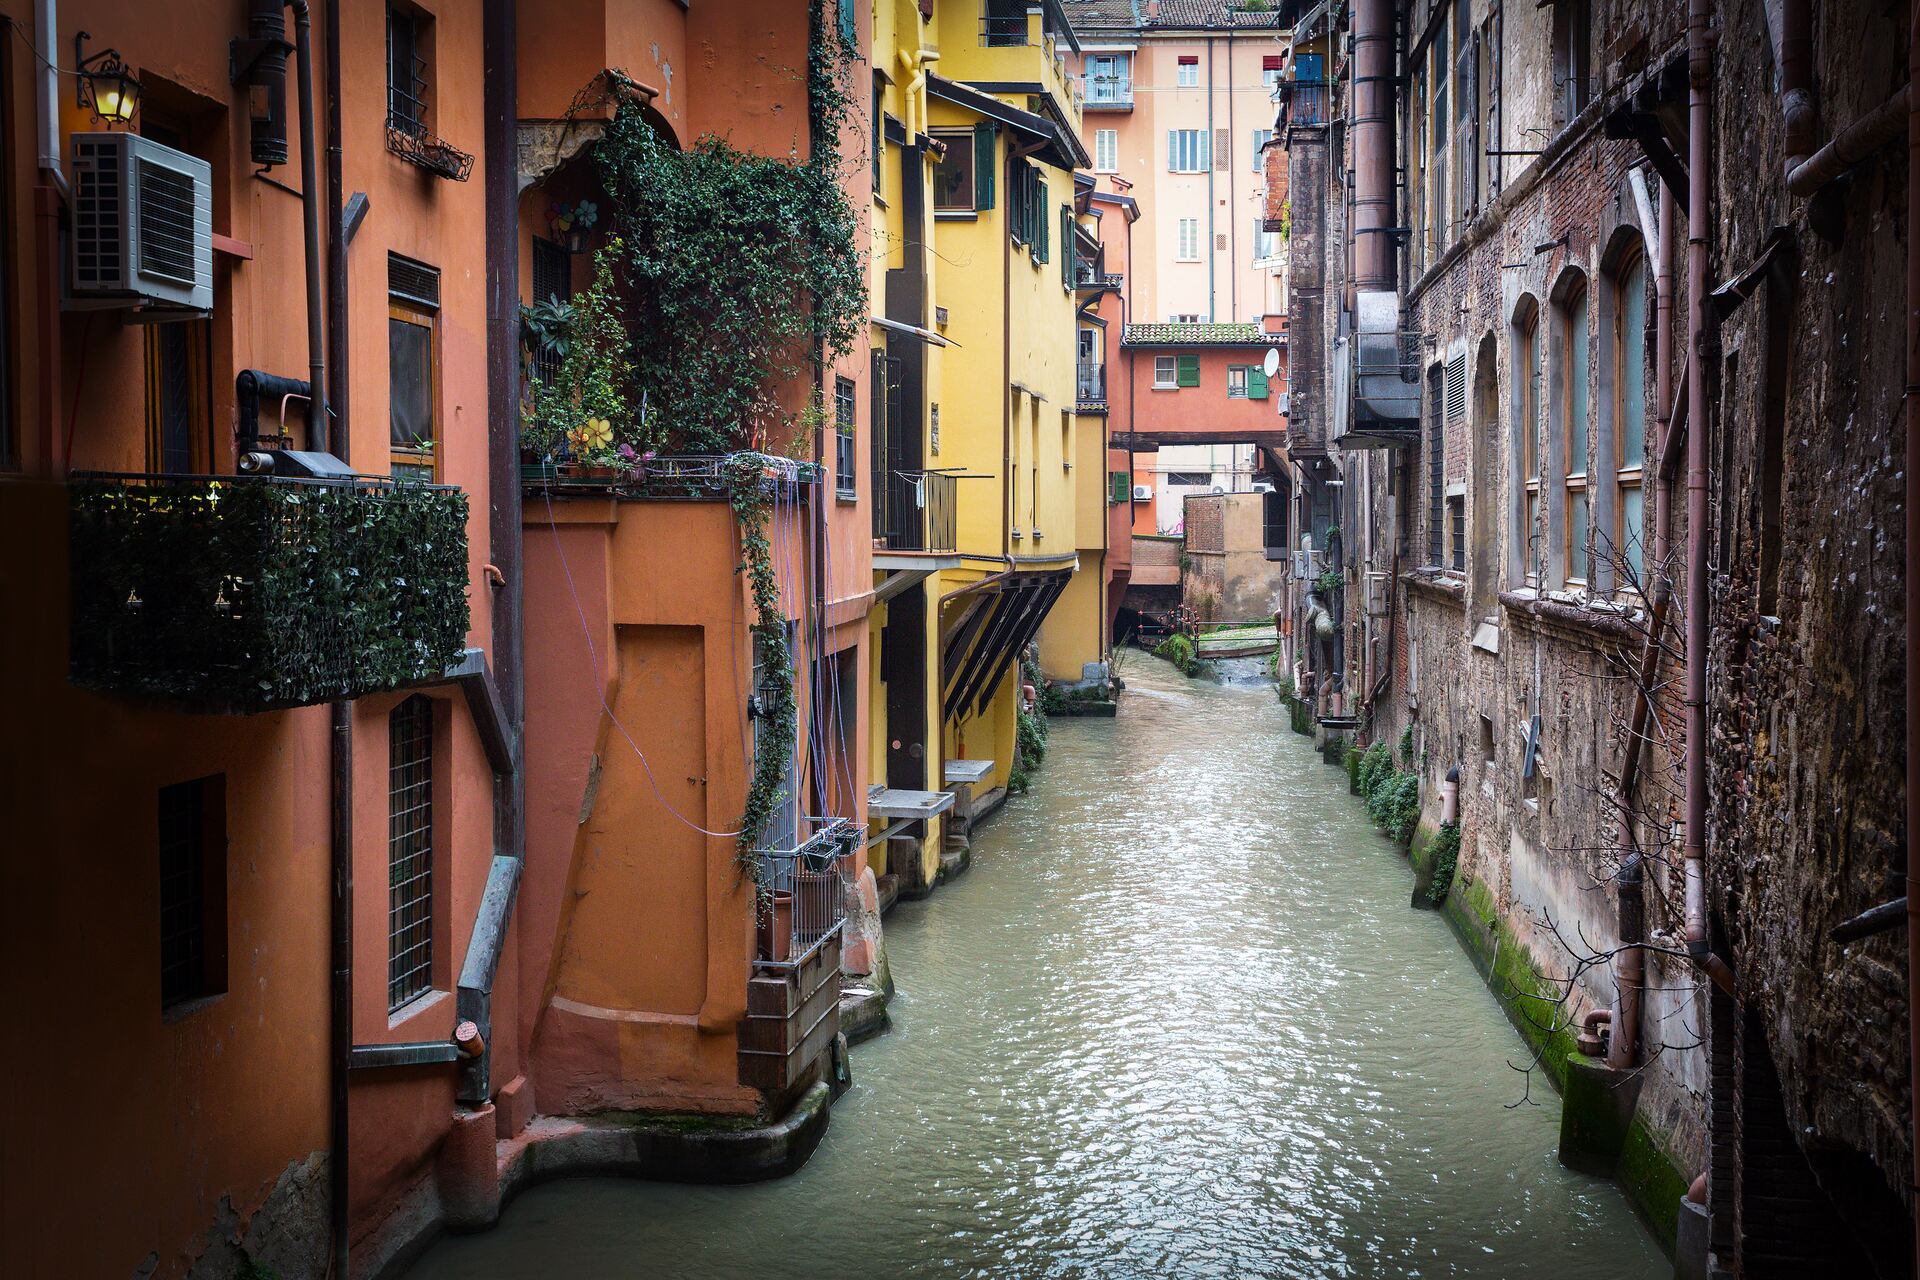 Rain: the little window in via Piella, overlooking the Canale delle Moline, is one of the most characteristic "aquatic places" in the center of Bologna